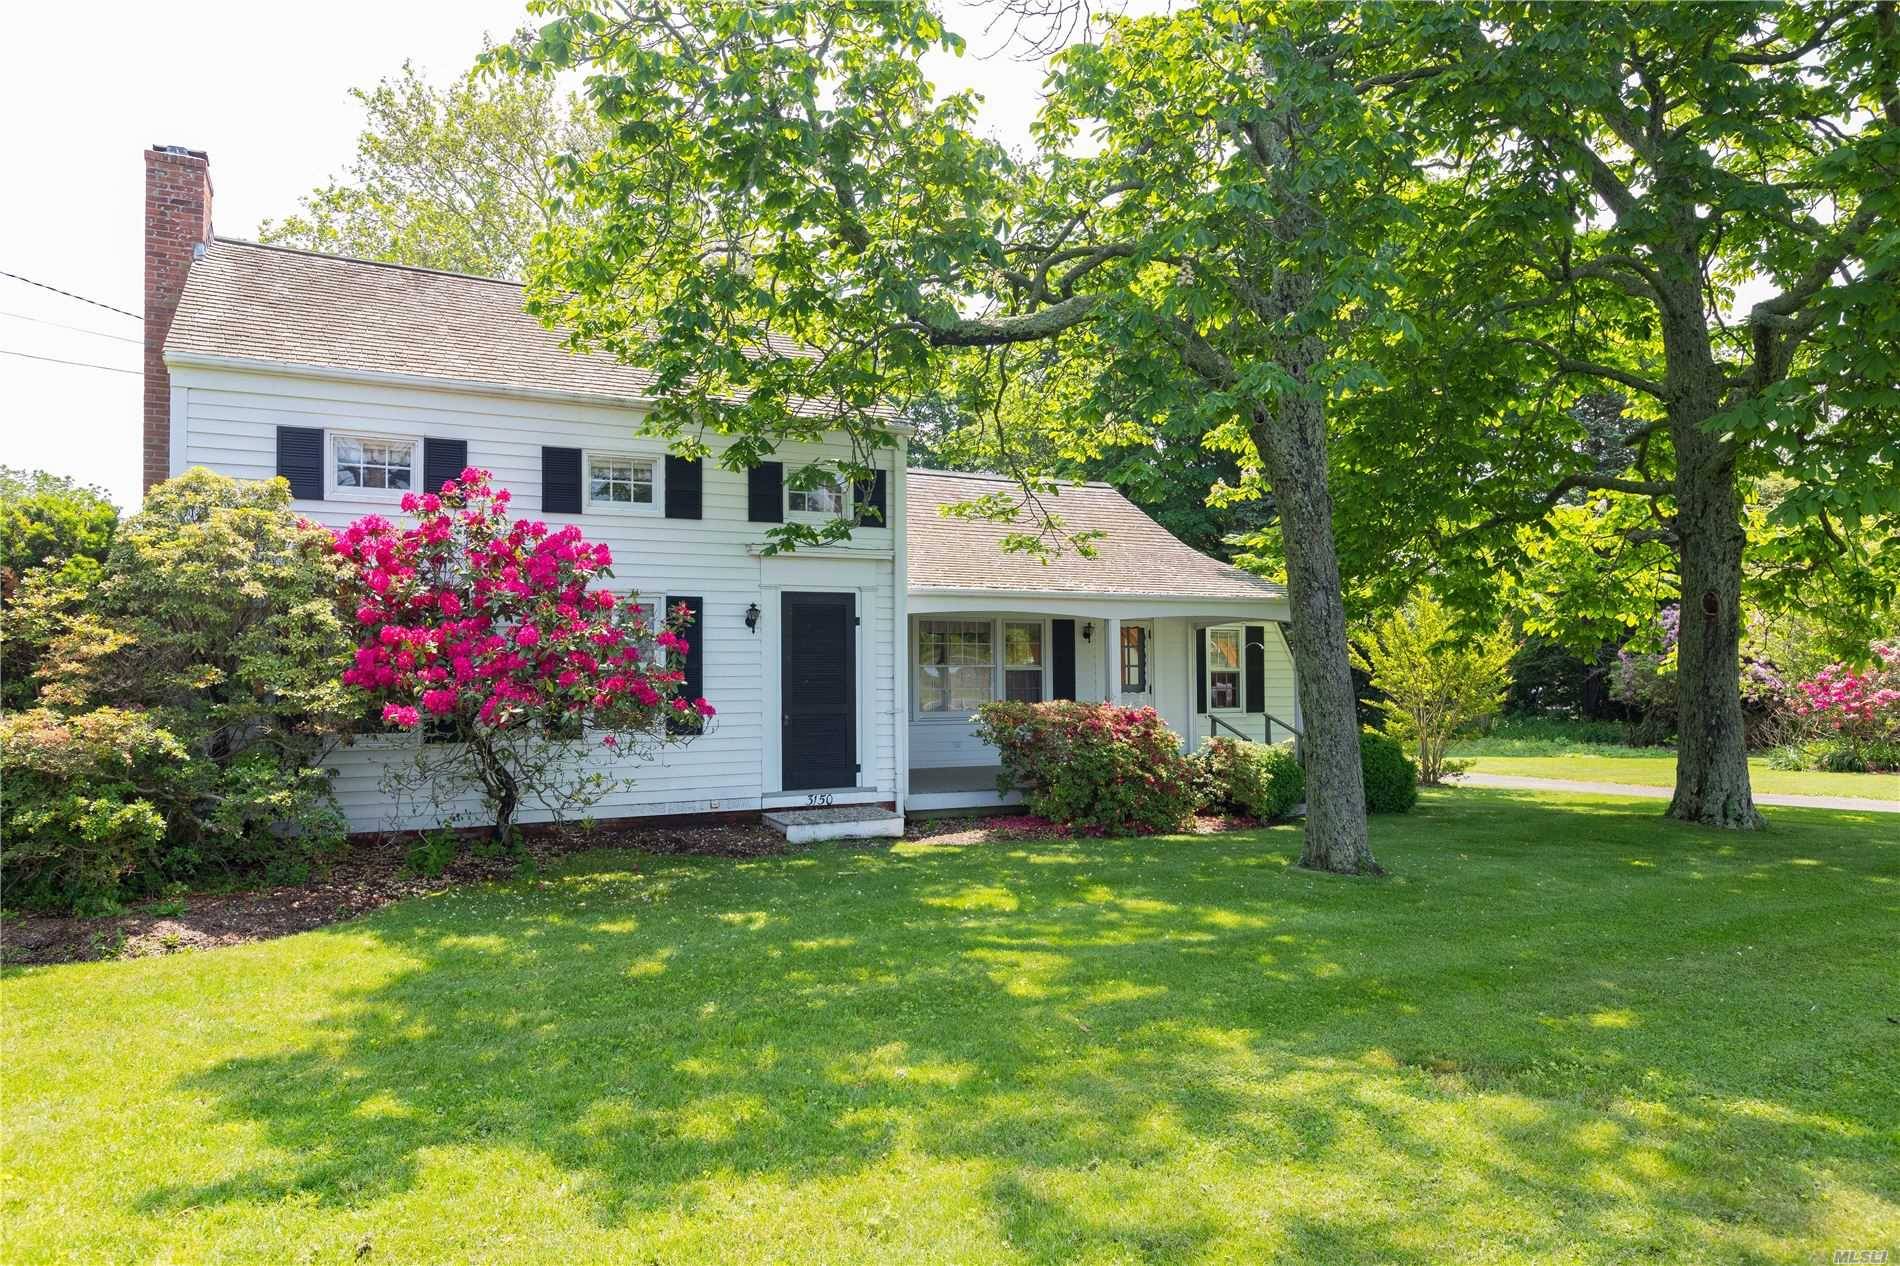 Old North Fork Charmer on 1 acre of manicured property comprised of 3 structures.